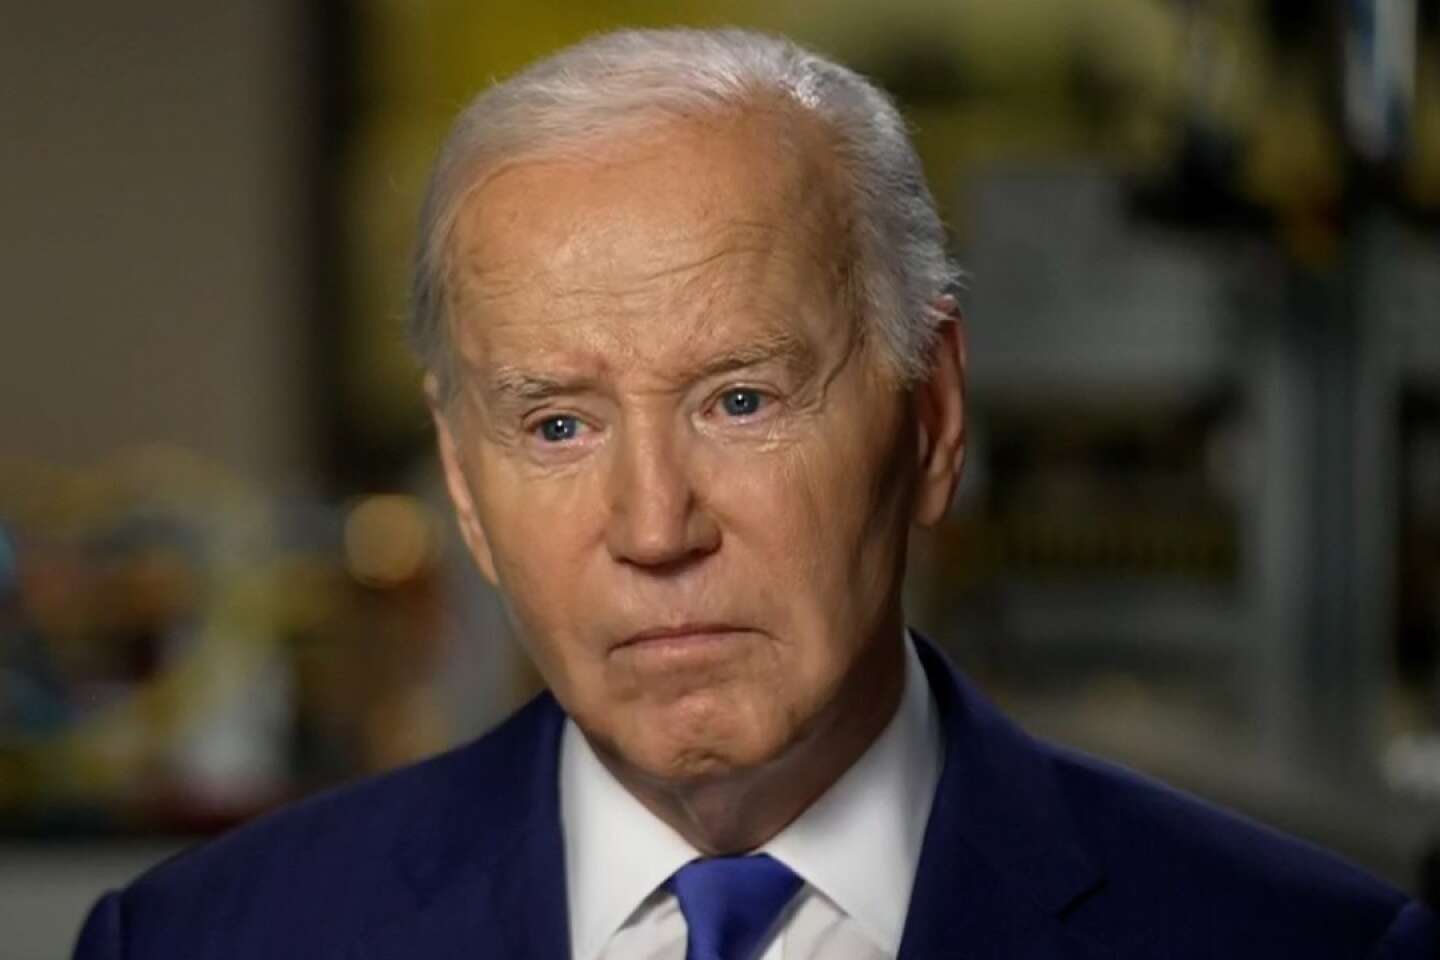 Joe Biden has announced that he will stop supplying Israel with offensive weapons in the event of a military intervention in Rafah.